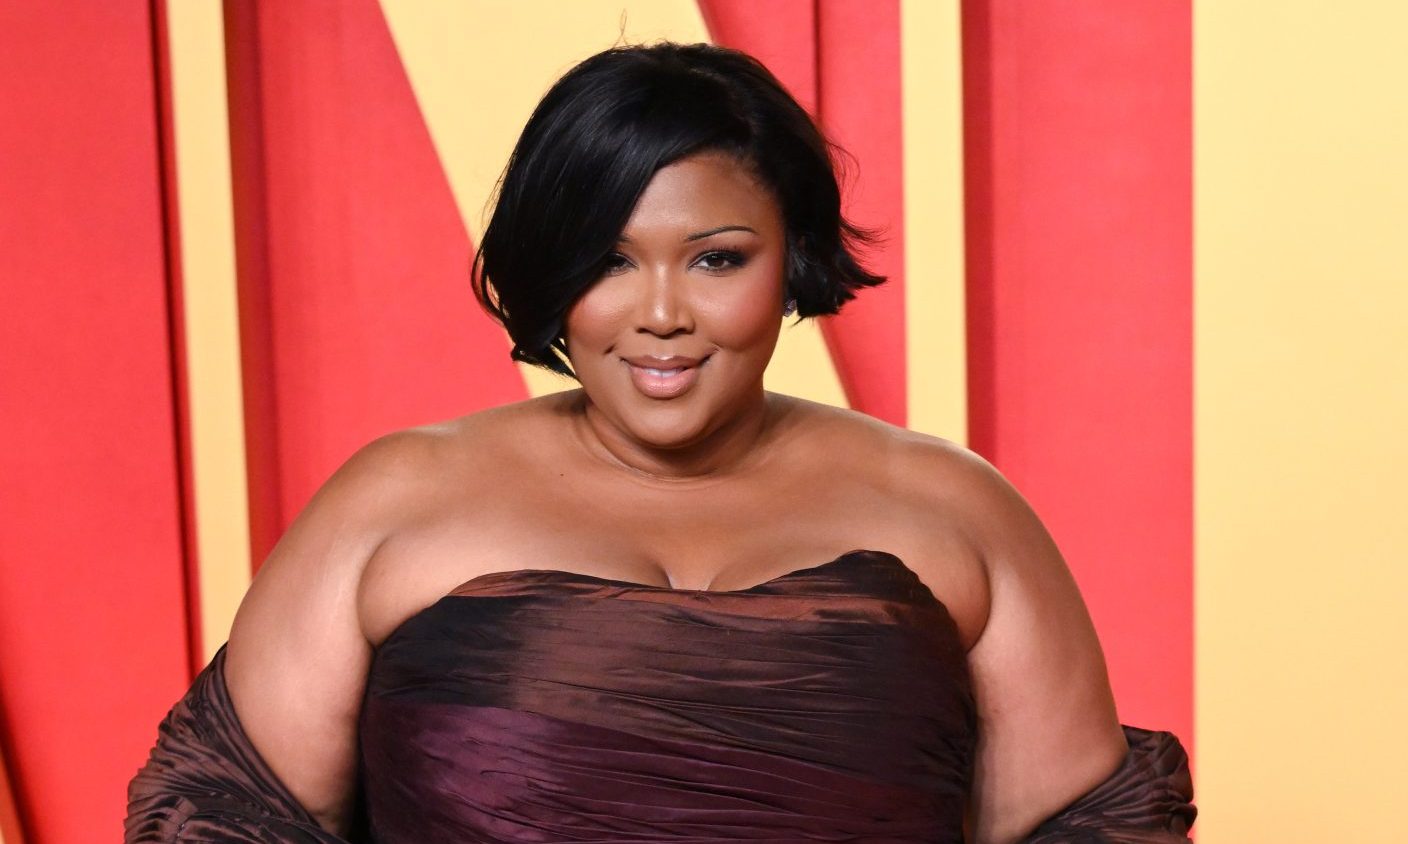 Lizzo Seemingly Quits The Music Industry In Emotional Social Media Post